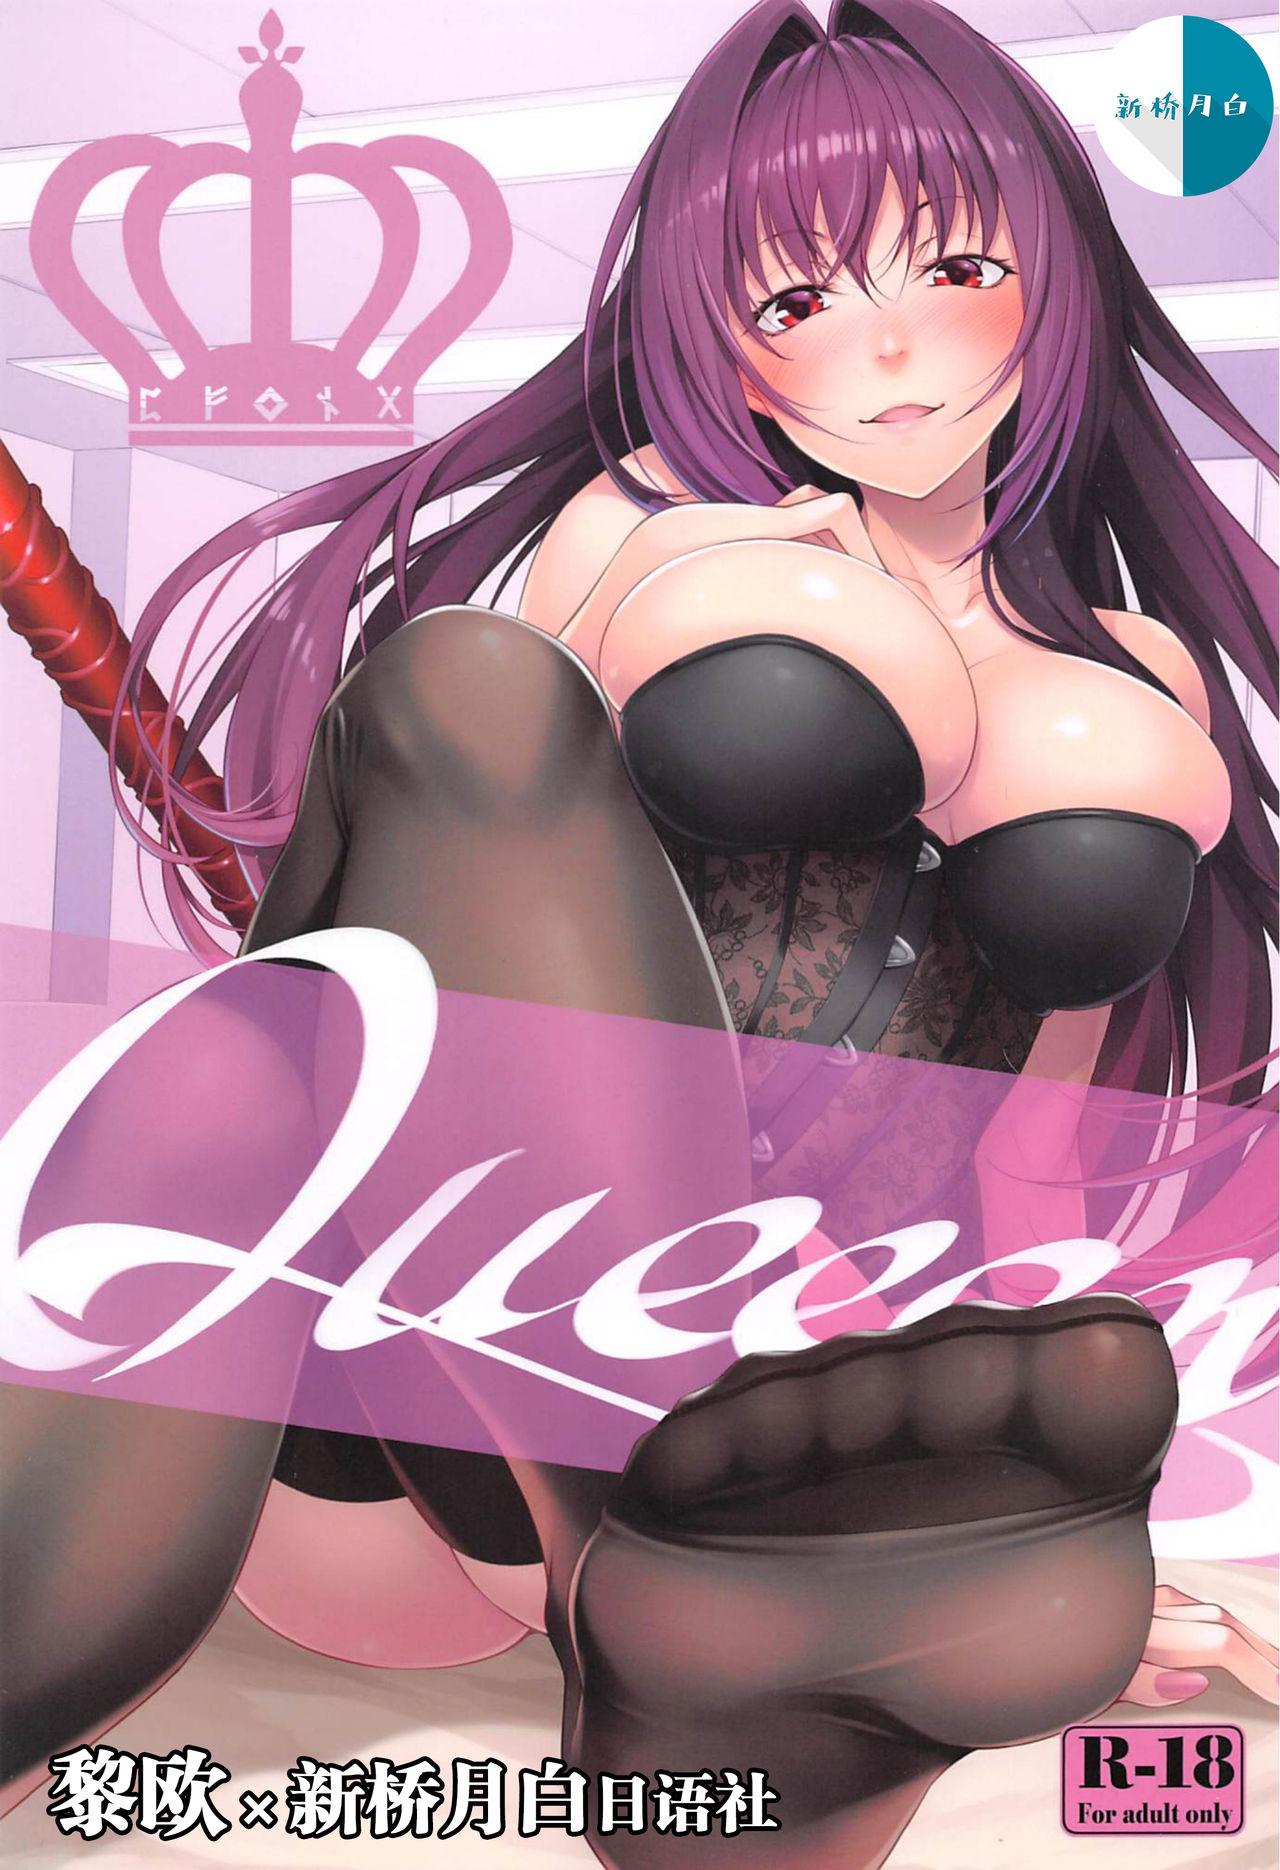 Threesome Queeen - Fate grand order Gay Friend - Page 1